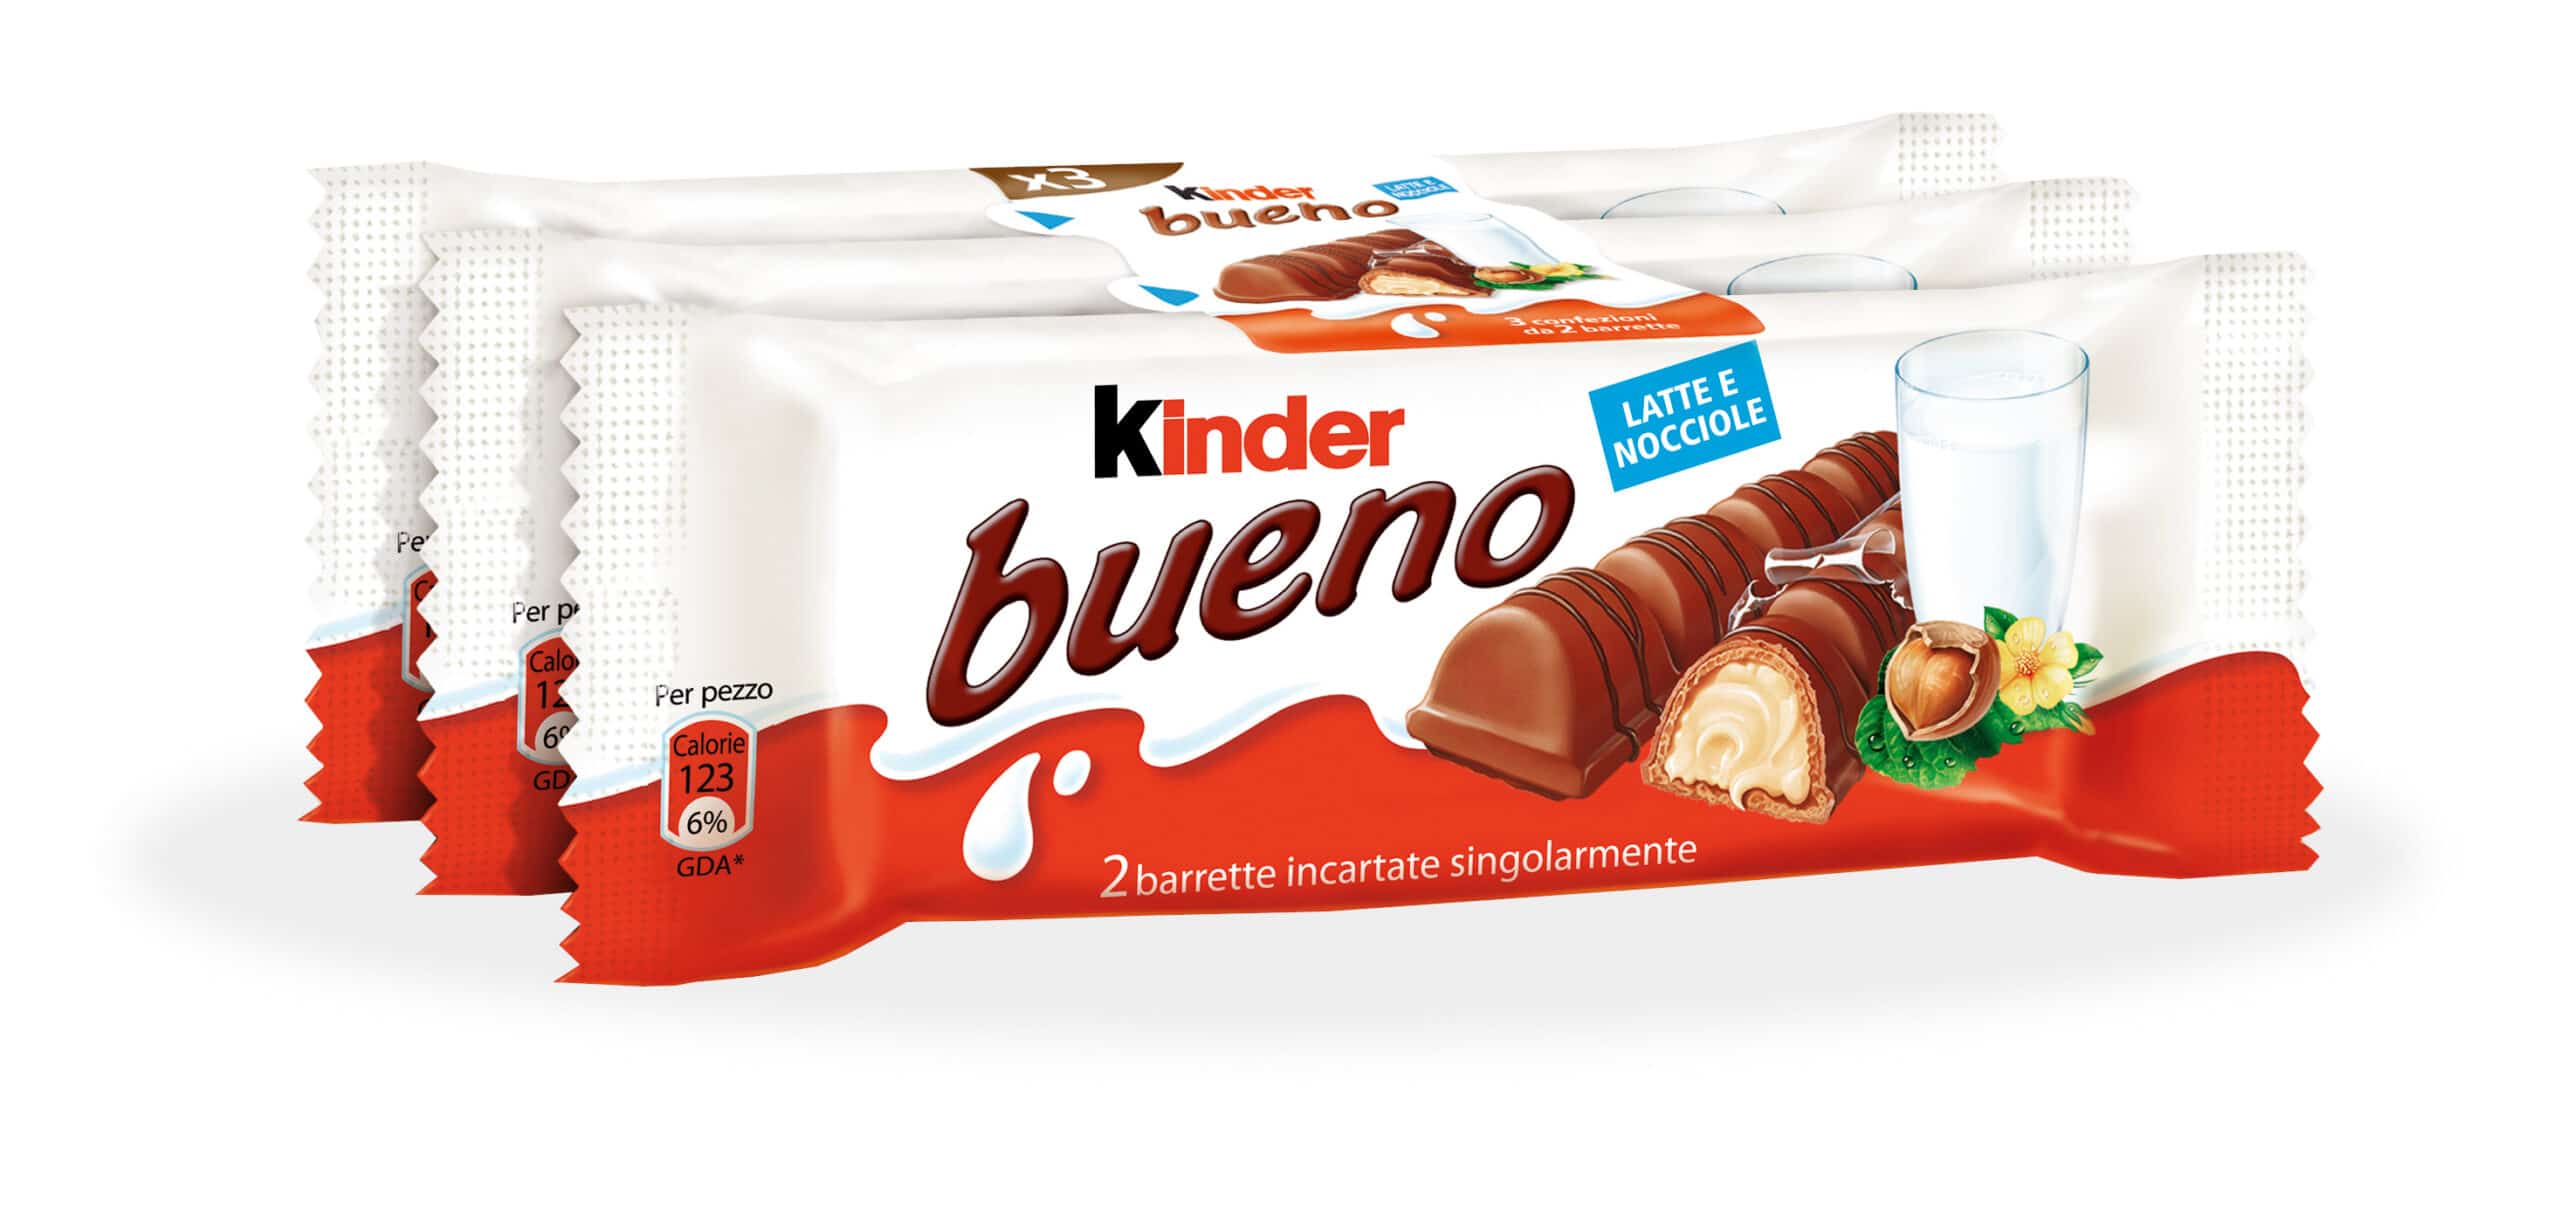 Ferrero: Kinder Bueno chocolate 3pz “Imported from Italy” – Terra World Wide